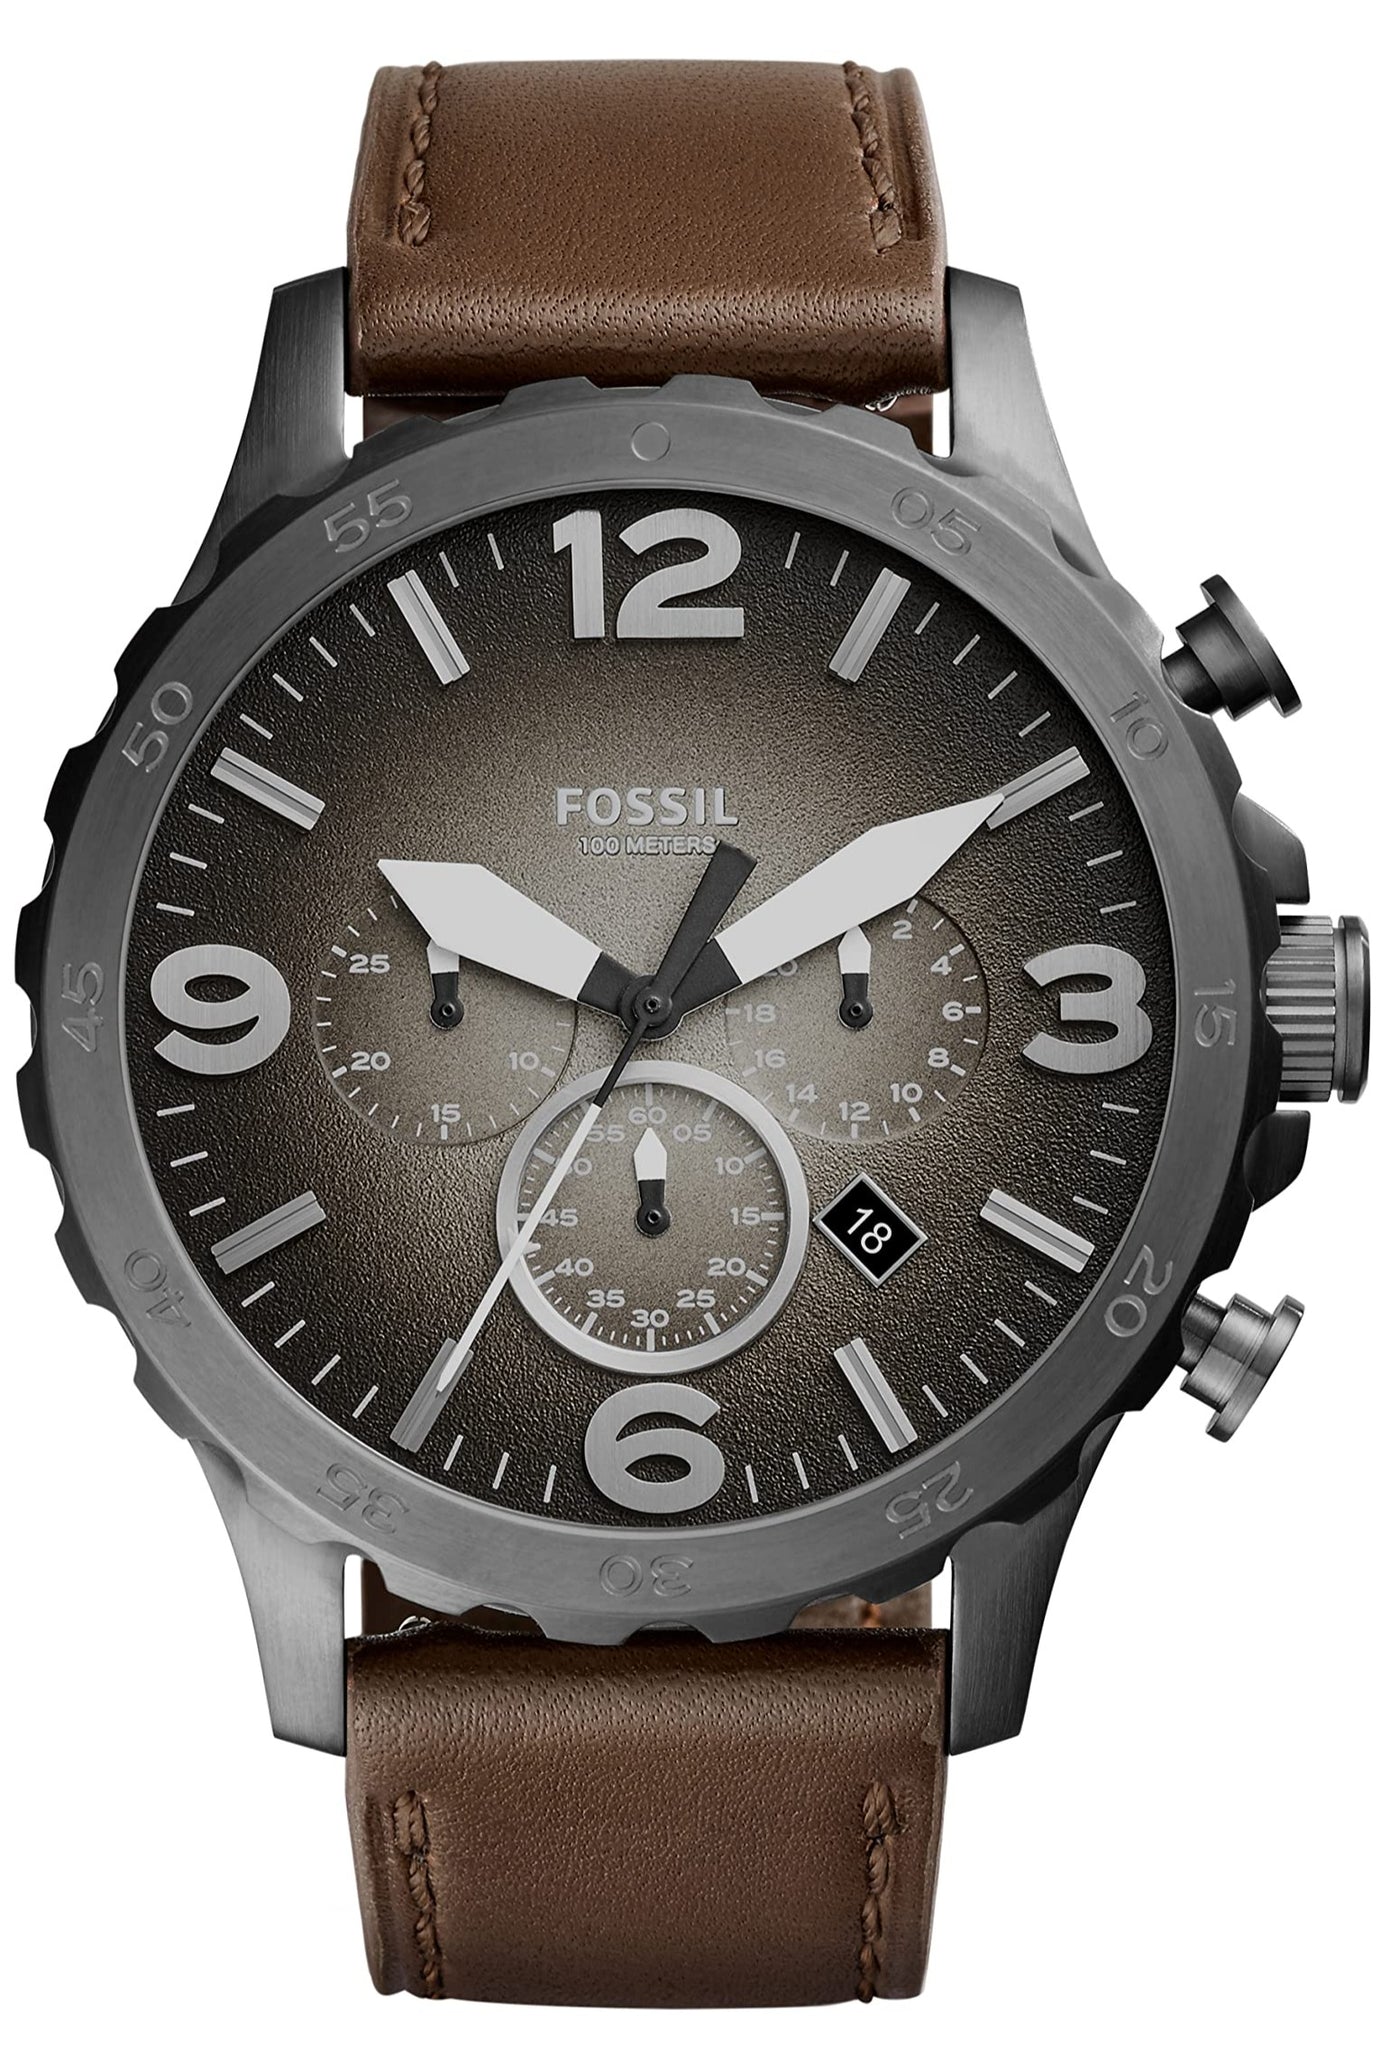 Fossil Nate Chronograph Grey Dial Brown Leather Strap Watch for Men - JR1424